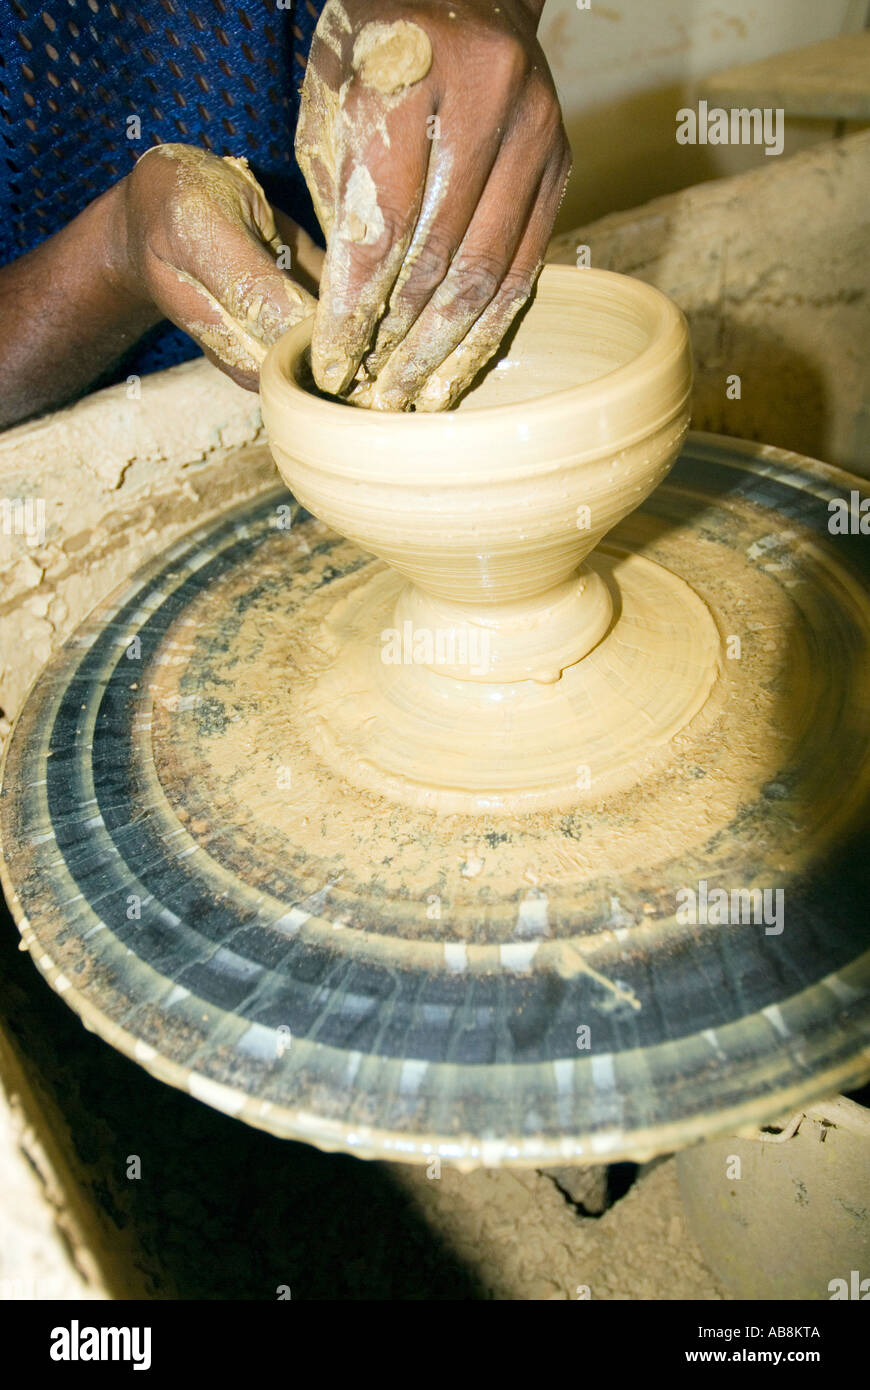 West Indies Trinidad Port of Spain Radikas Clay Pottery Shop Artist forming clay cup on Pottery wheel Stock Photo